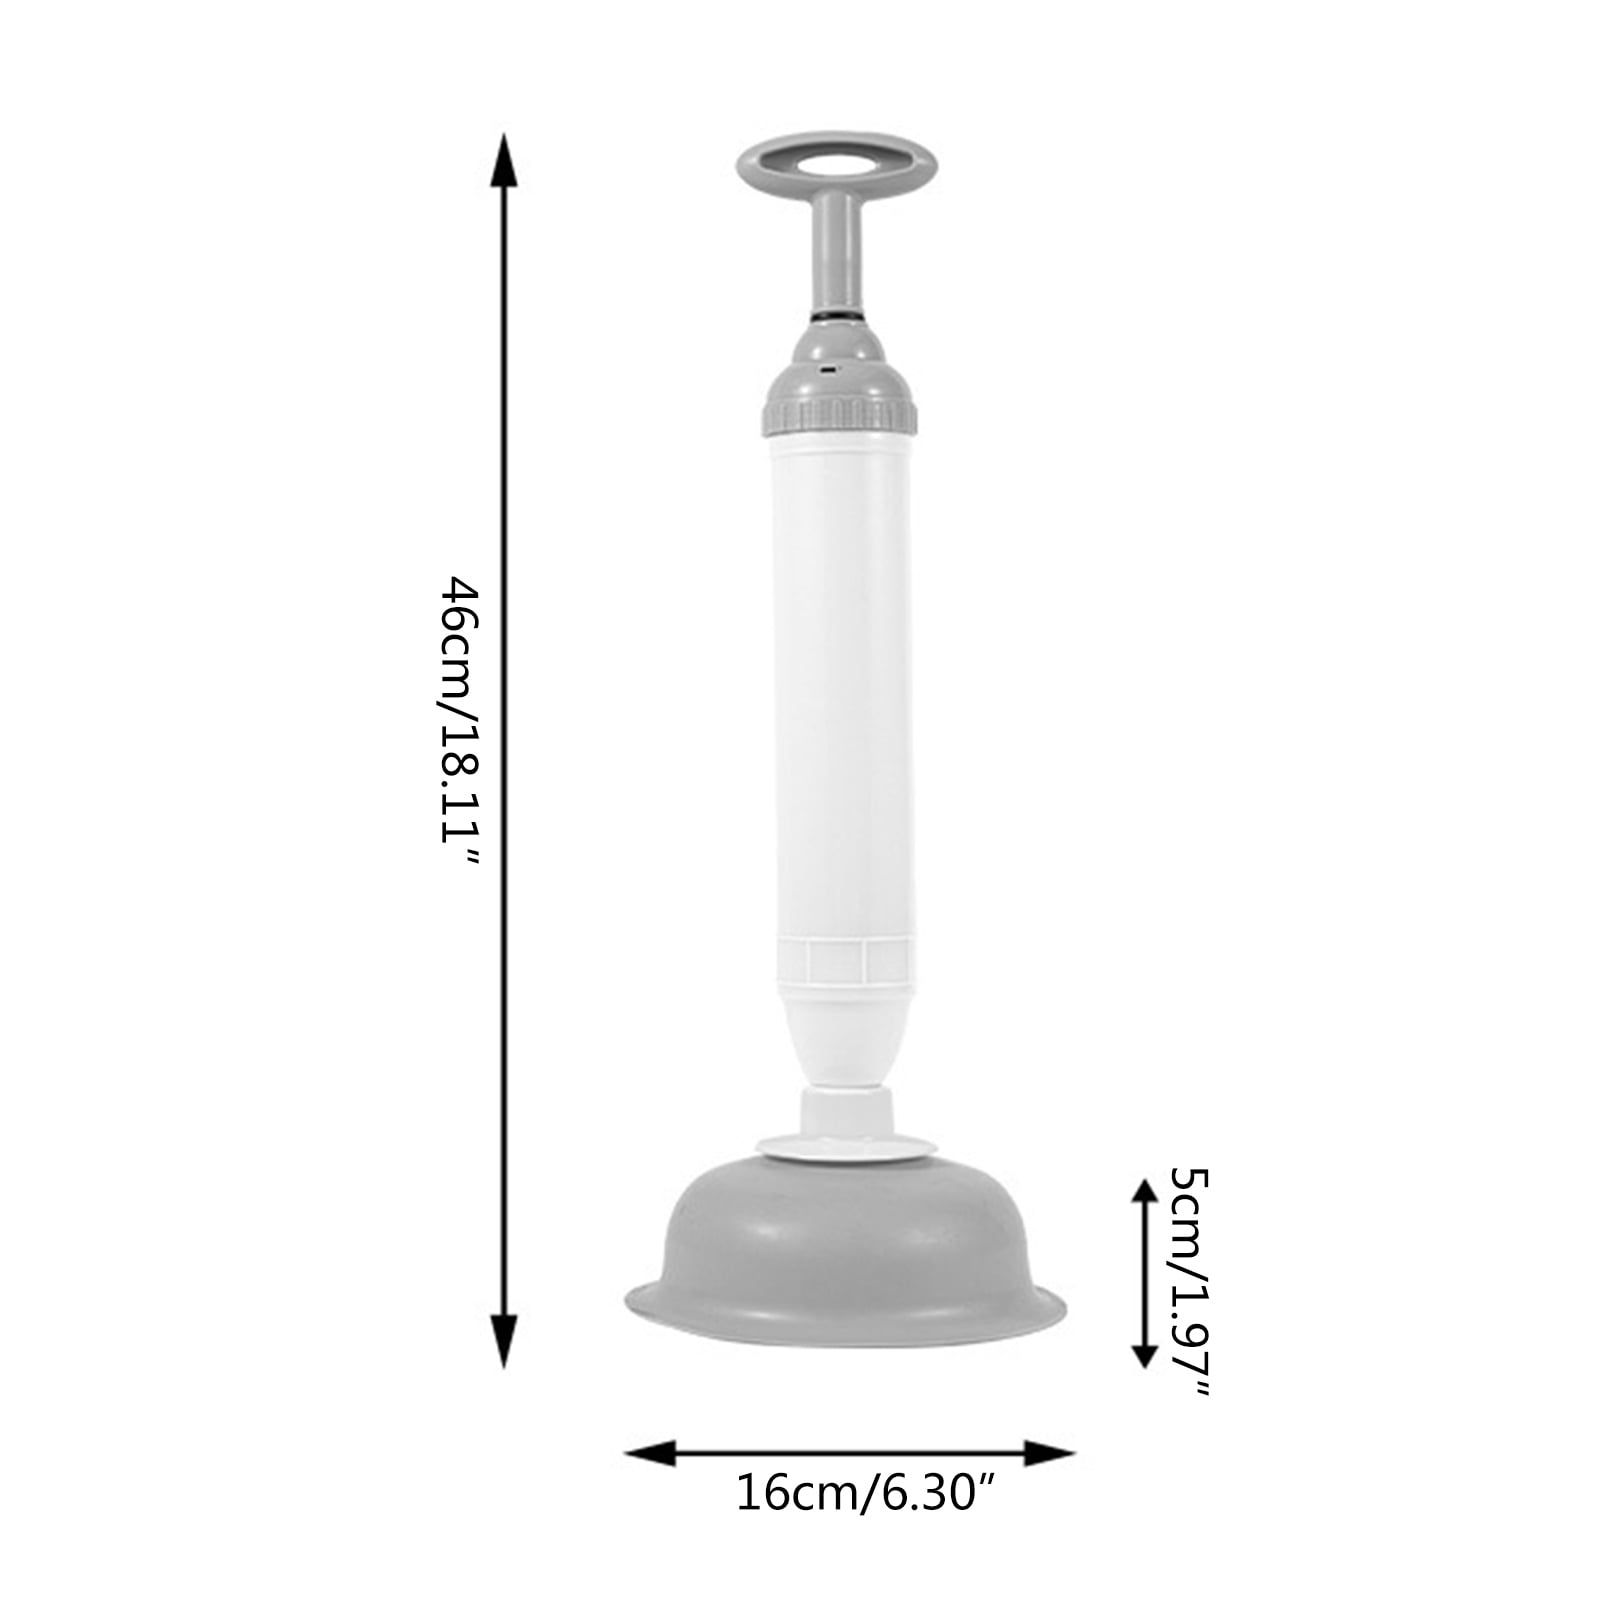 Prinxy Toilet Plunger,Bathroom Toilet Plunger Vacuum Pump Plunger Household Toilet Suction Plunger,Suitable for Home,Office and Hotel Green, Size